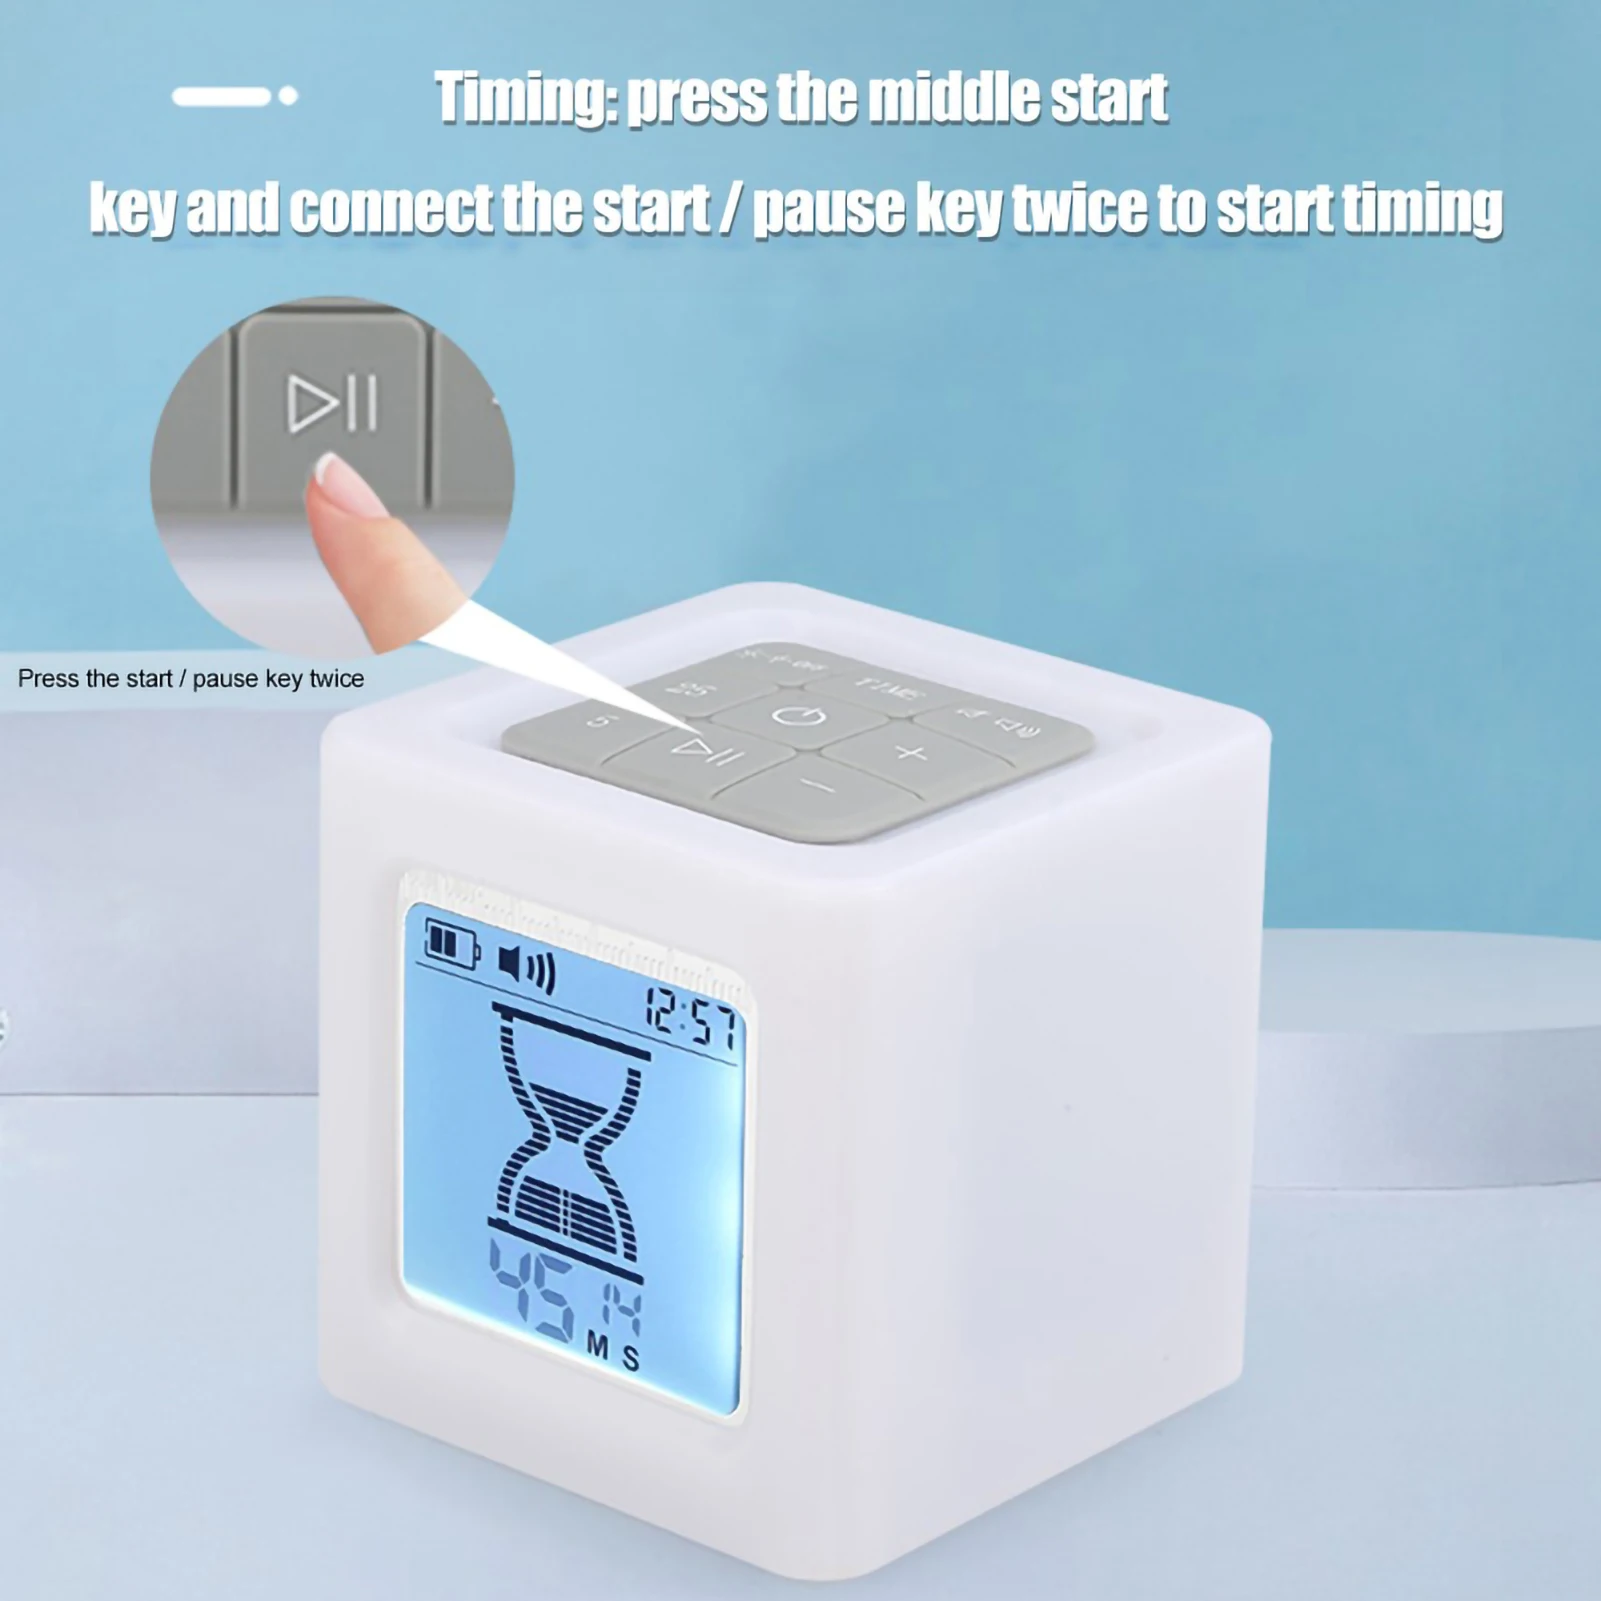 Cube LED Timer Kitchen Cooking Learning Hourglass Timer Glowing Night Light Countdown Work Exercise Time Management Clock